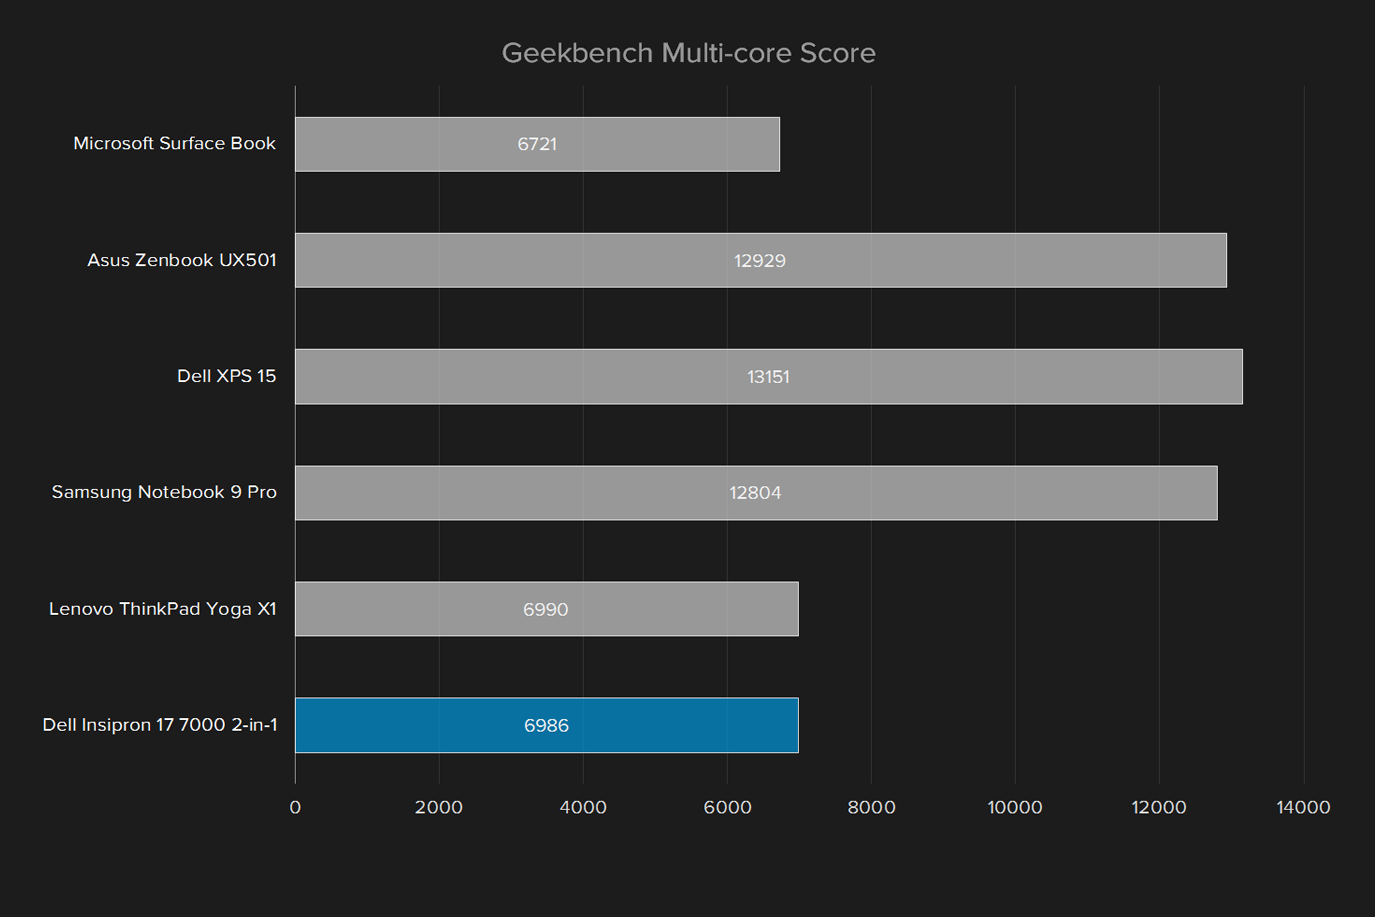 dell inspiron 17 7000 2 in 1 2016 review insipron geekbench multi core